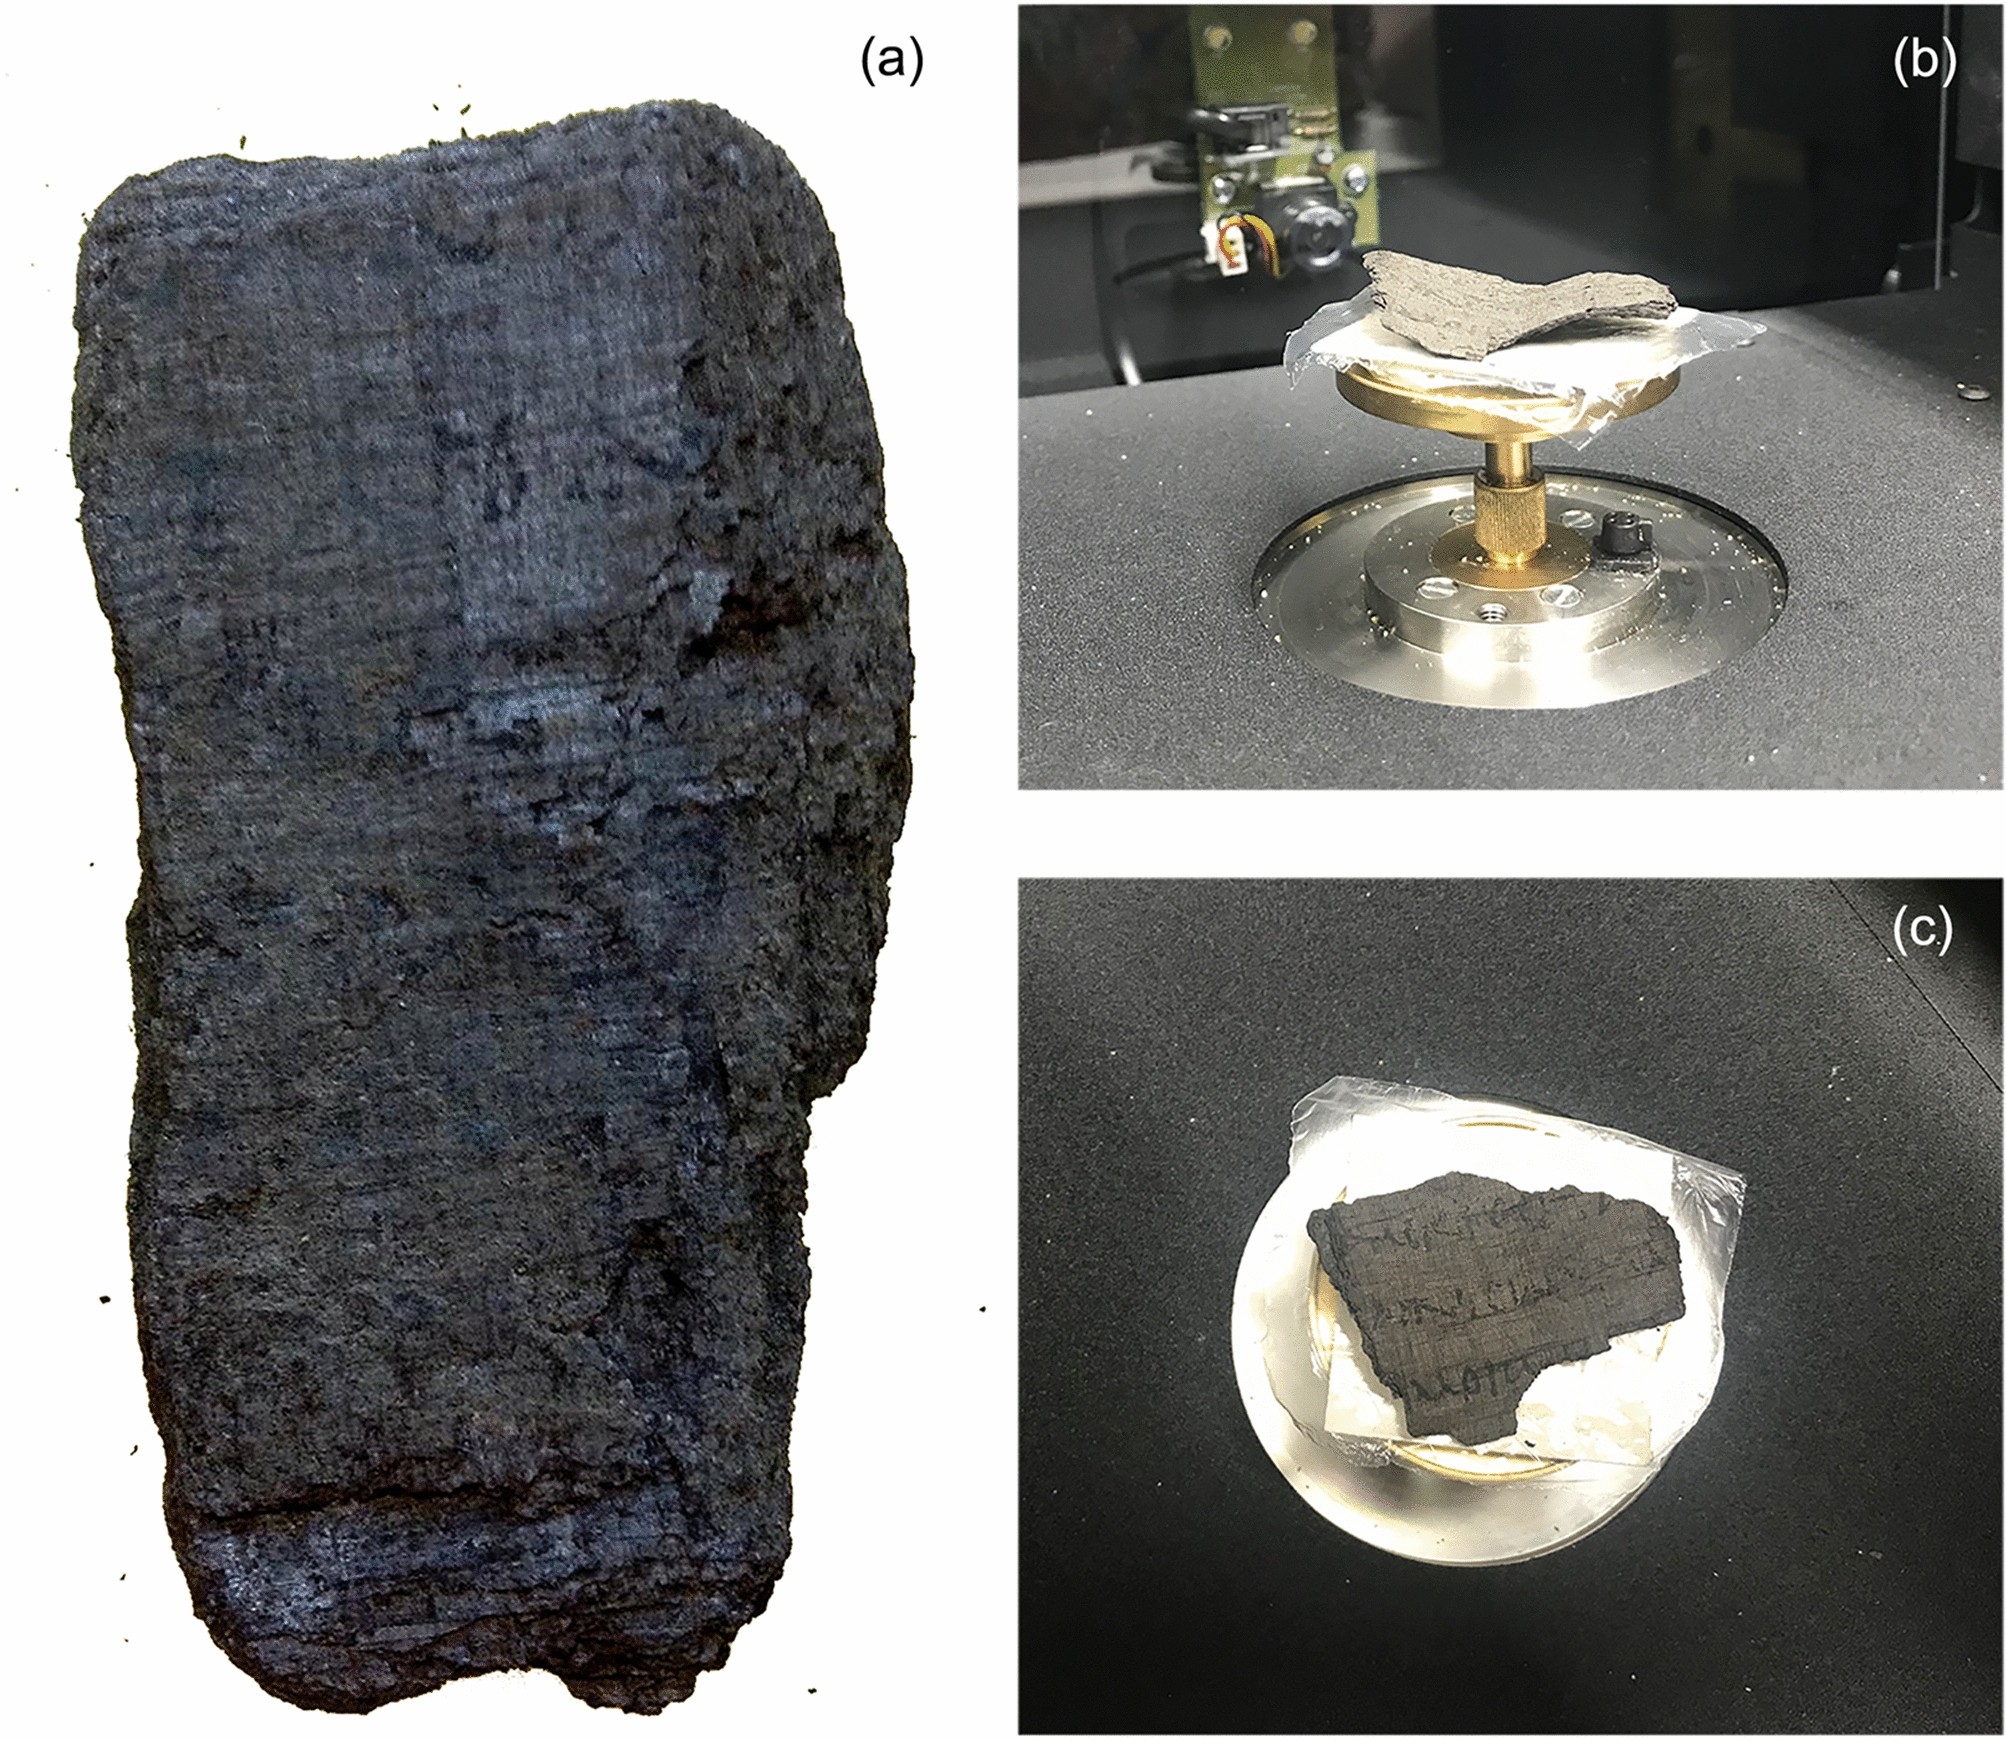 Four pictures of a piece of rock and a piece of metal found near Vesuvius.